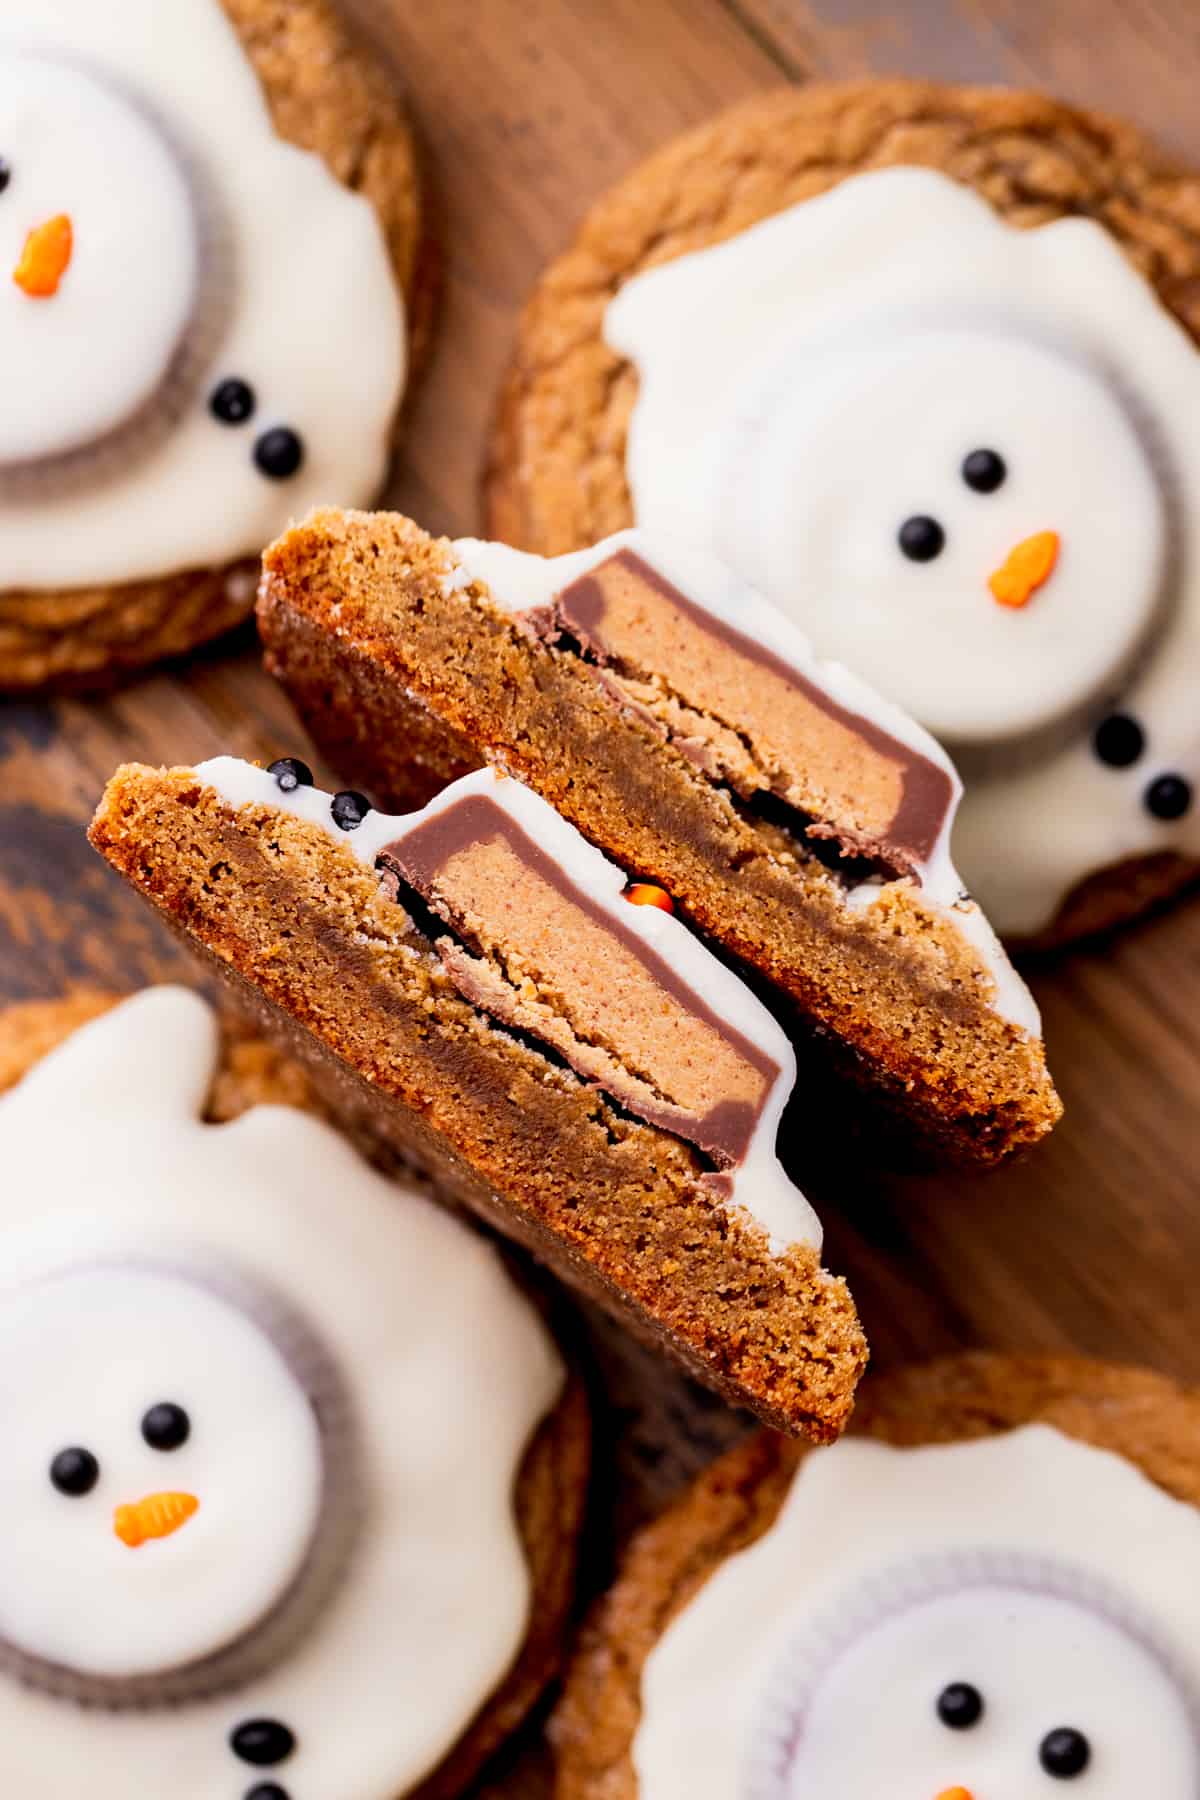 Snowman cookie cut in half to show the insides.